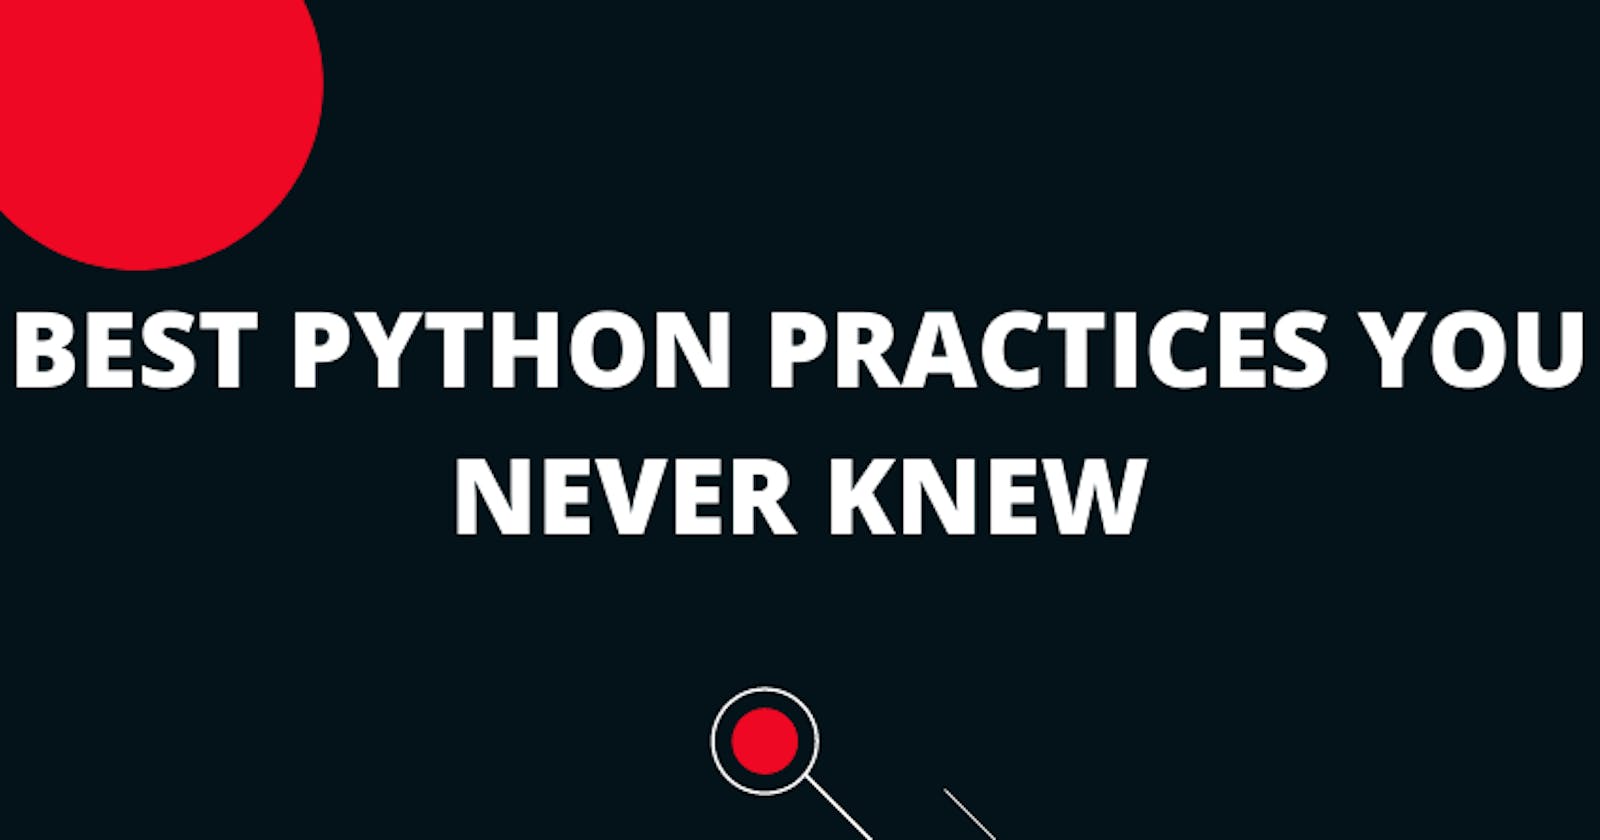 Best Python Practices You Never Knew